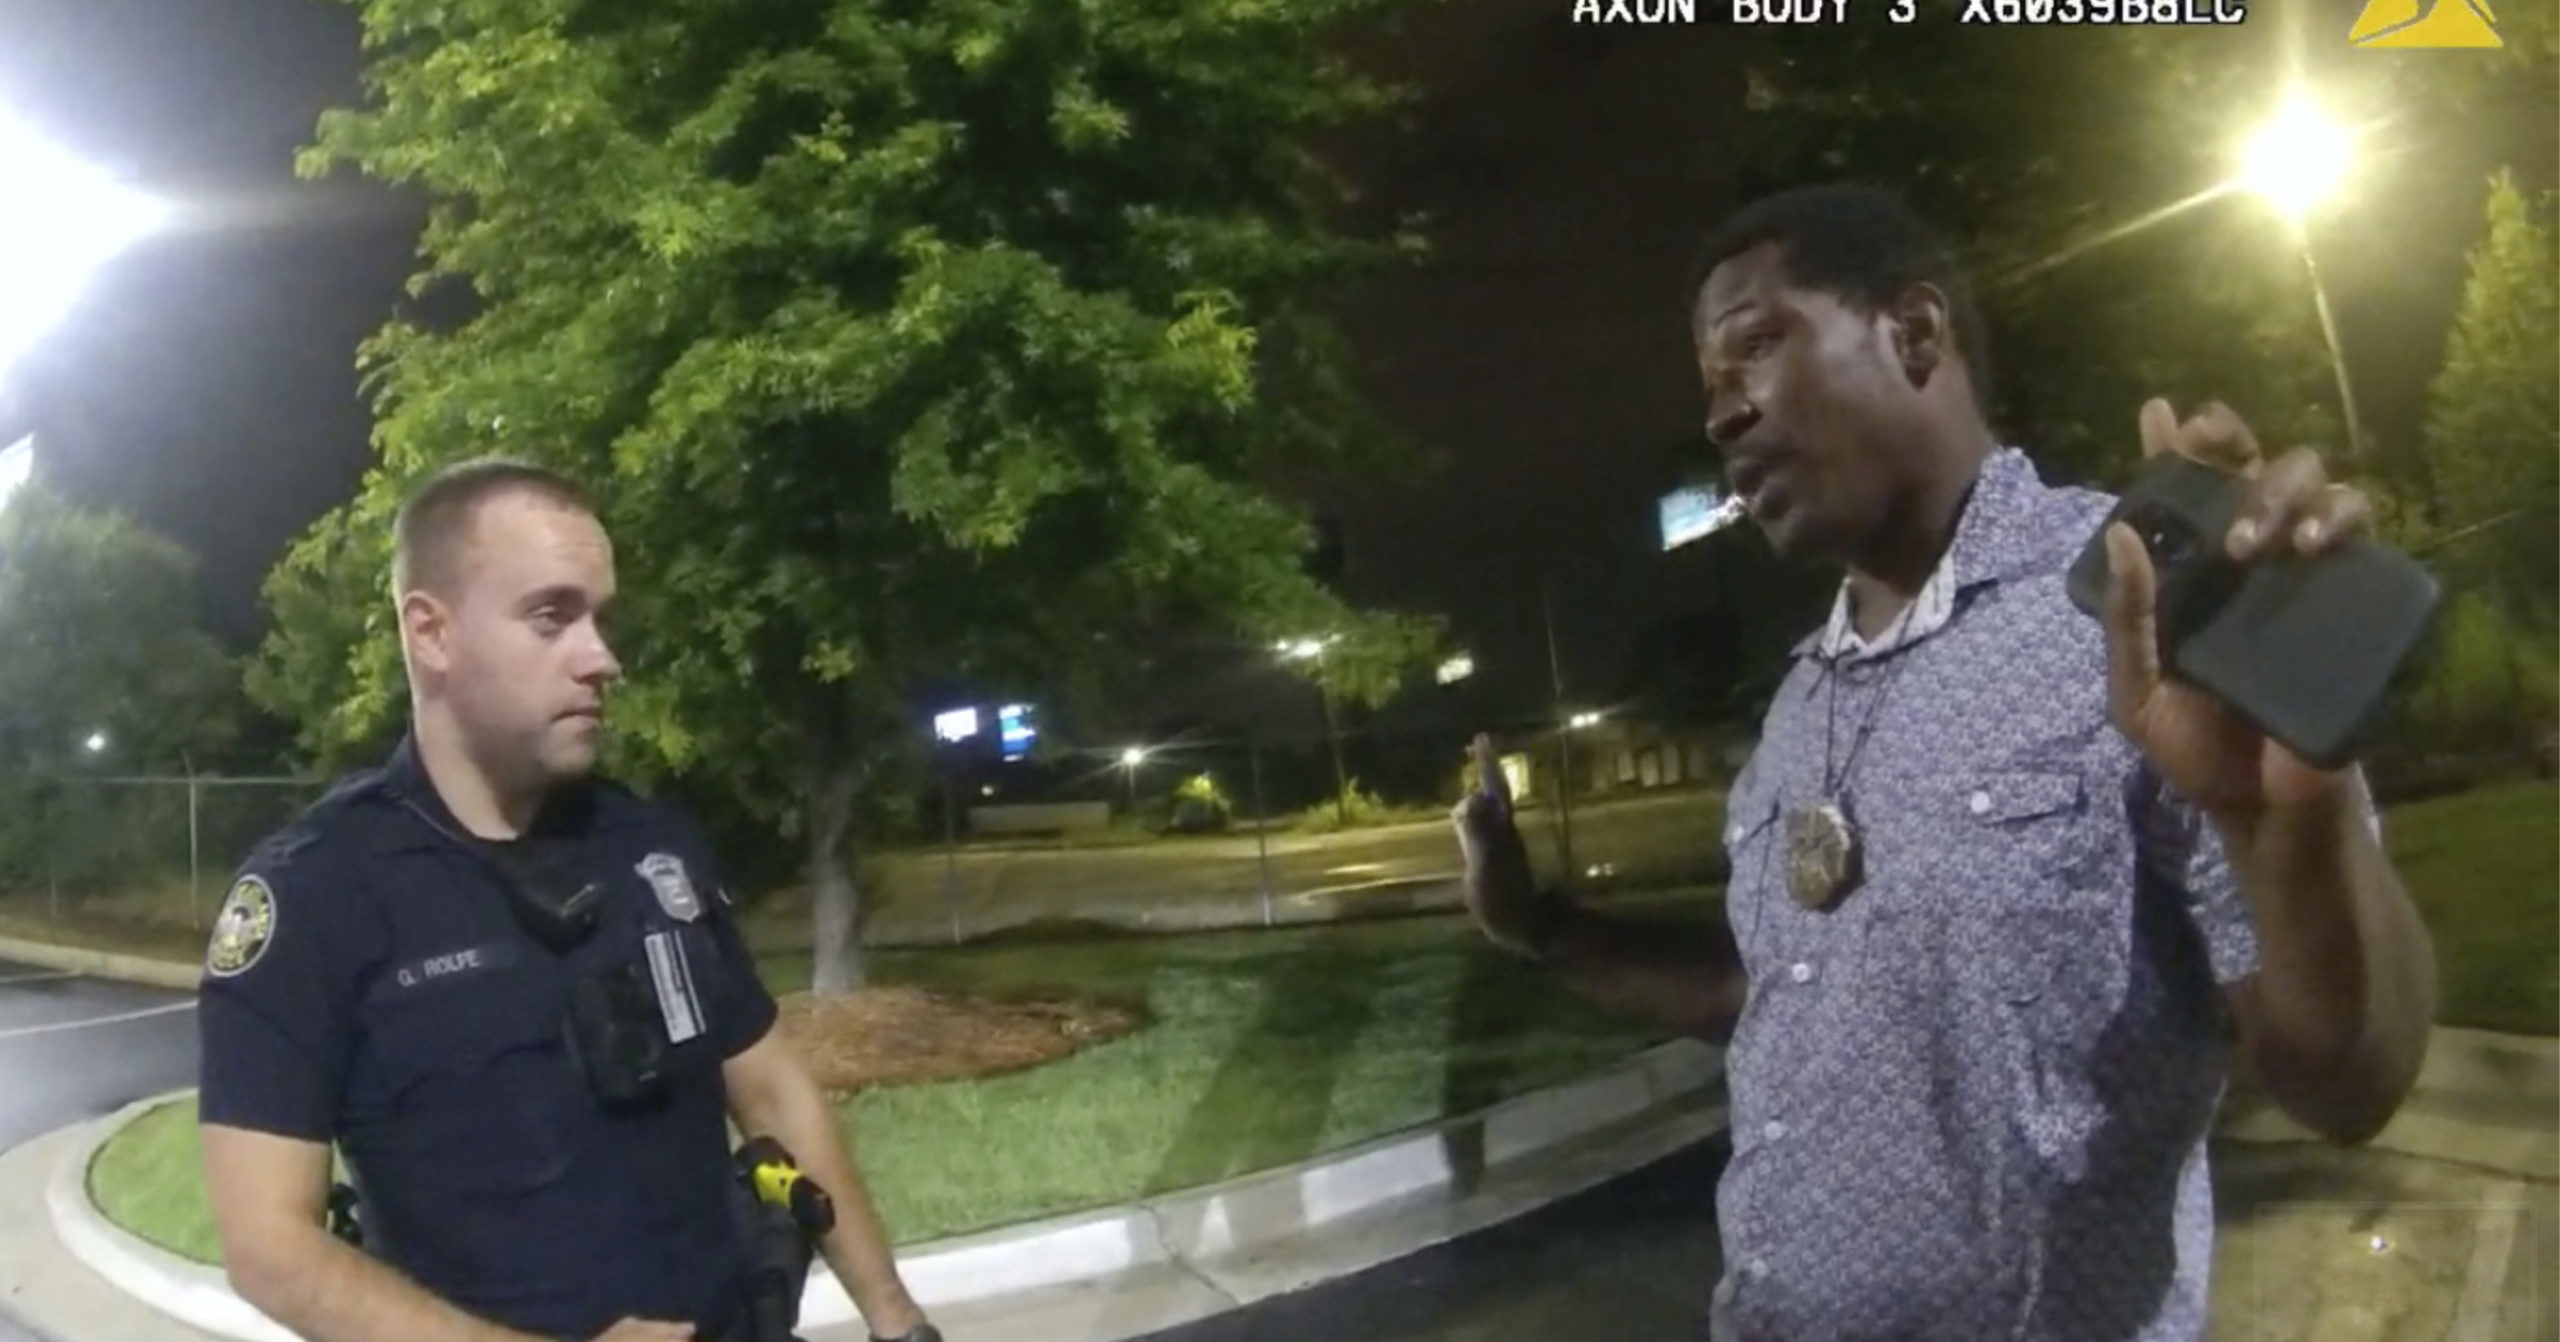 Rayshard Brooks, right, speaks with officer Garrett Rolfe, left, in the parking lot of a Wendy's restaurant in Atlanta on June 12, 2020, in this image taken from body camera video.